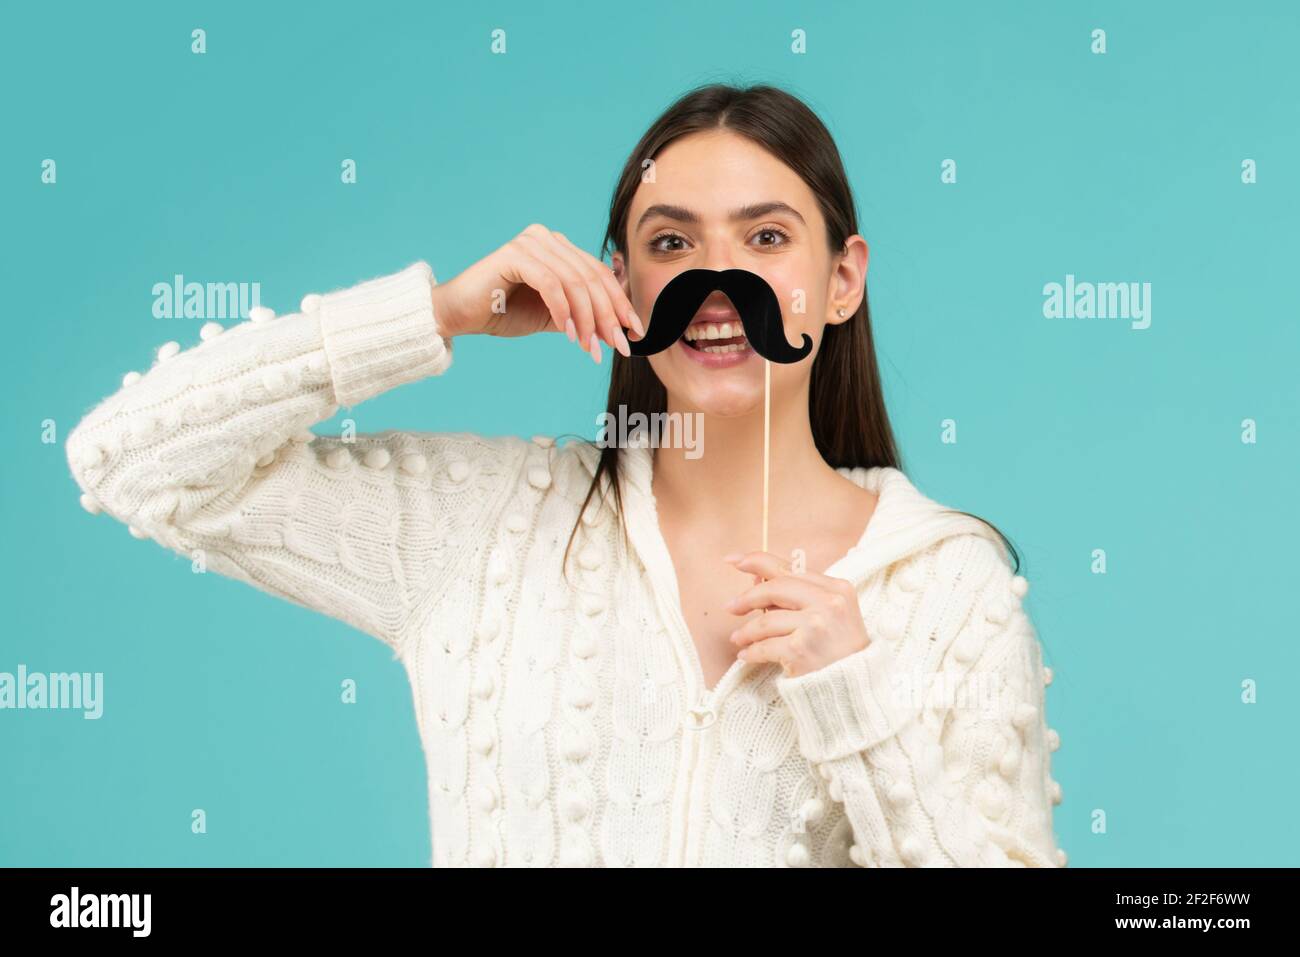 Photo booth party. Fake mustache on stick. Happy woman holding mustache and smiling. Stock Photo